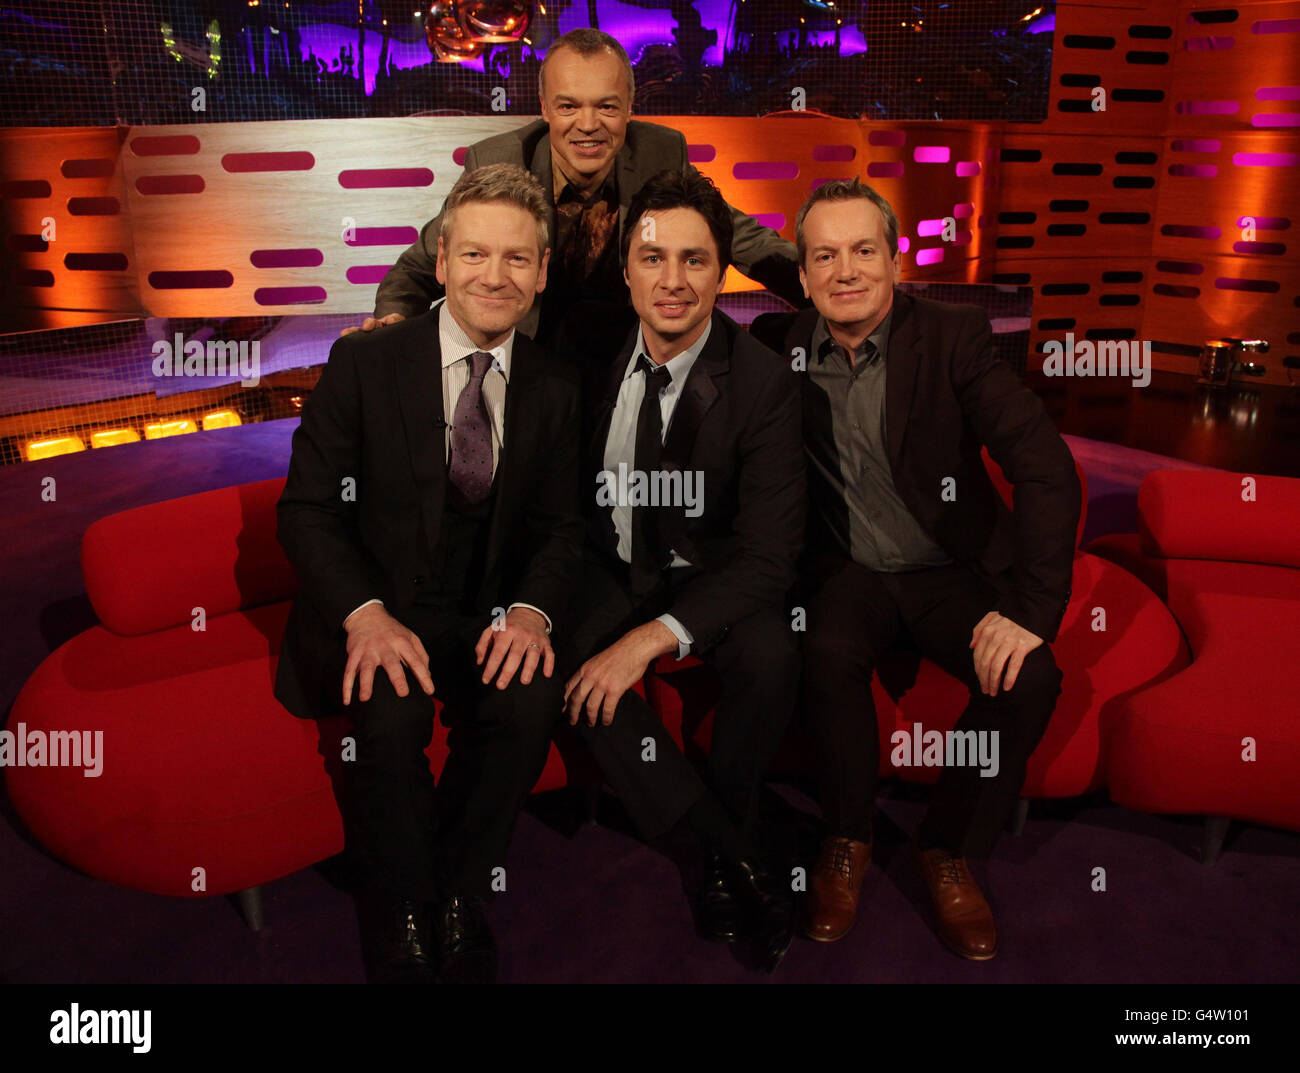 Host Graham Norton (top) with guests (left to right) Kenneth Branagh, Zach Braff and Frank Skinner during filming of The Graham Norton Show at The London Studios in south London. Stock Photo